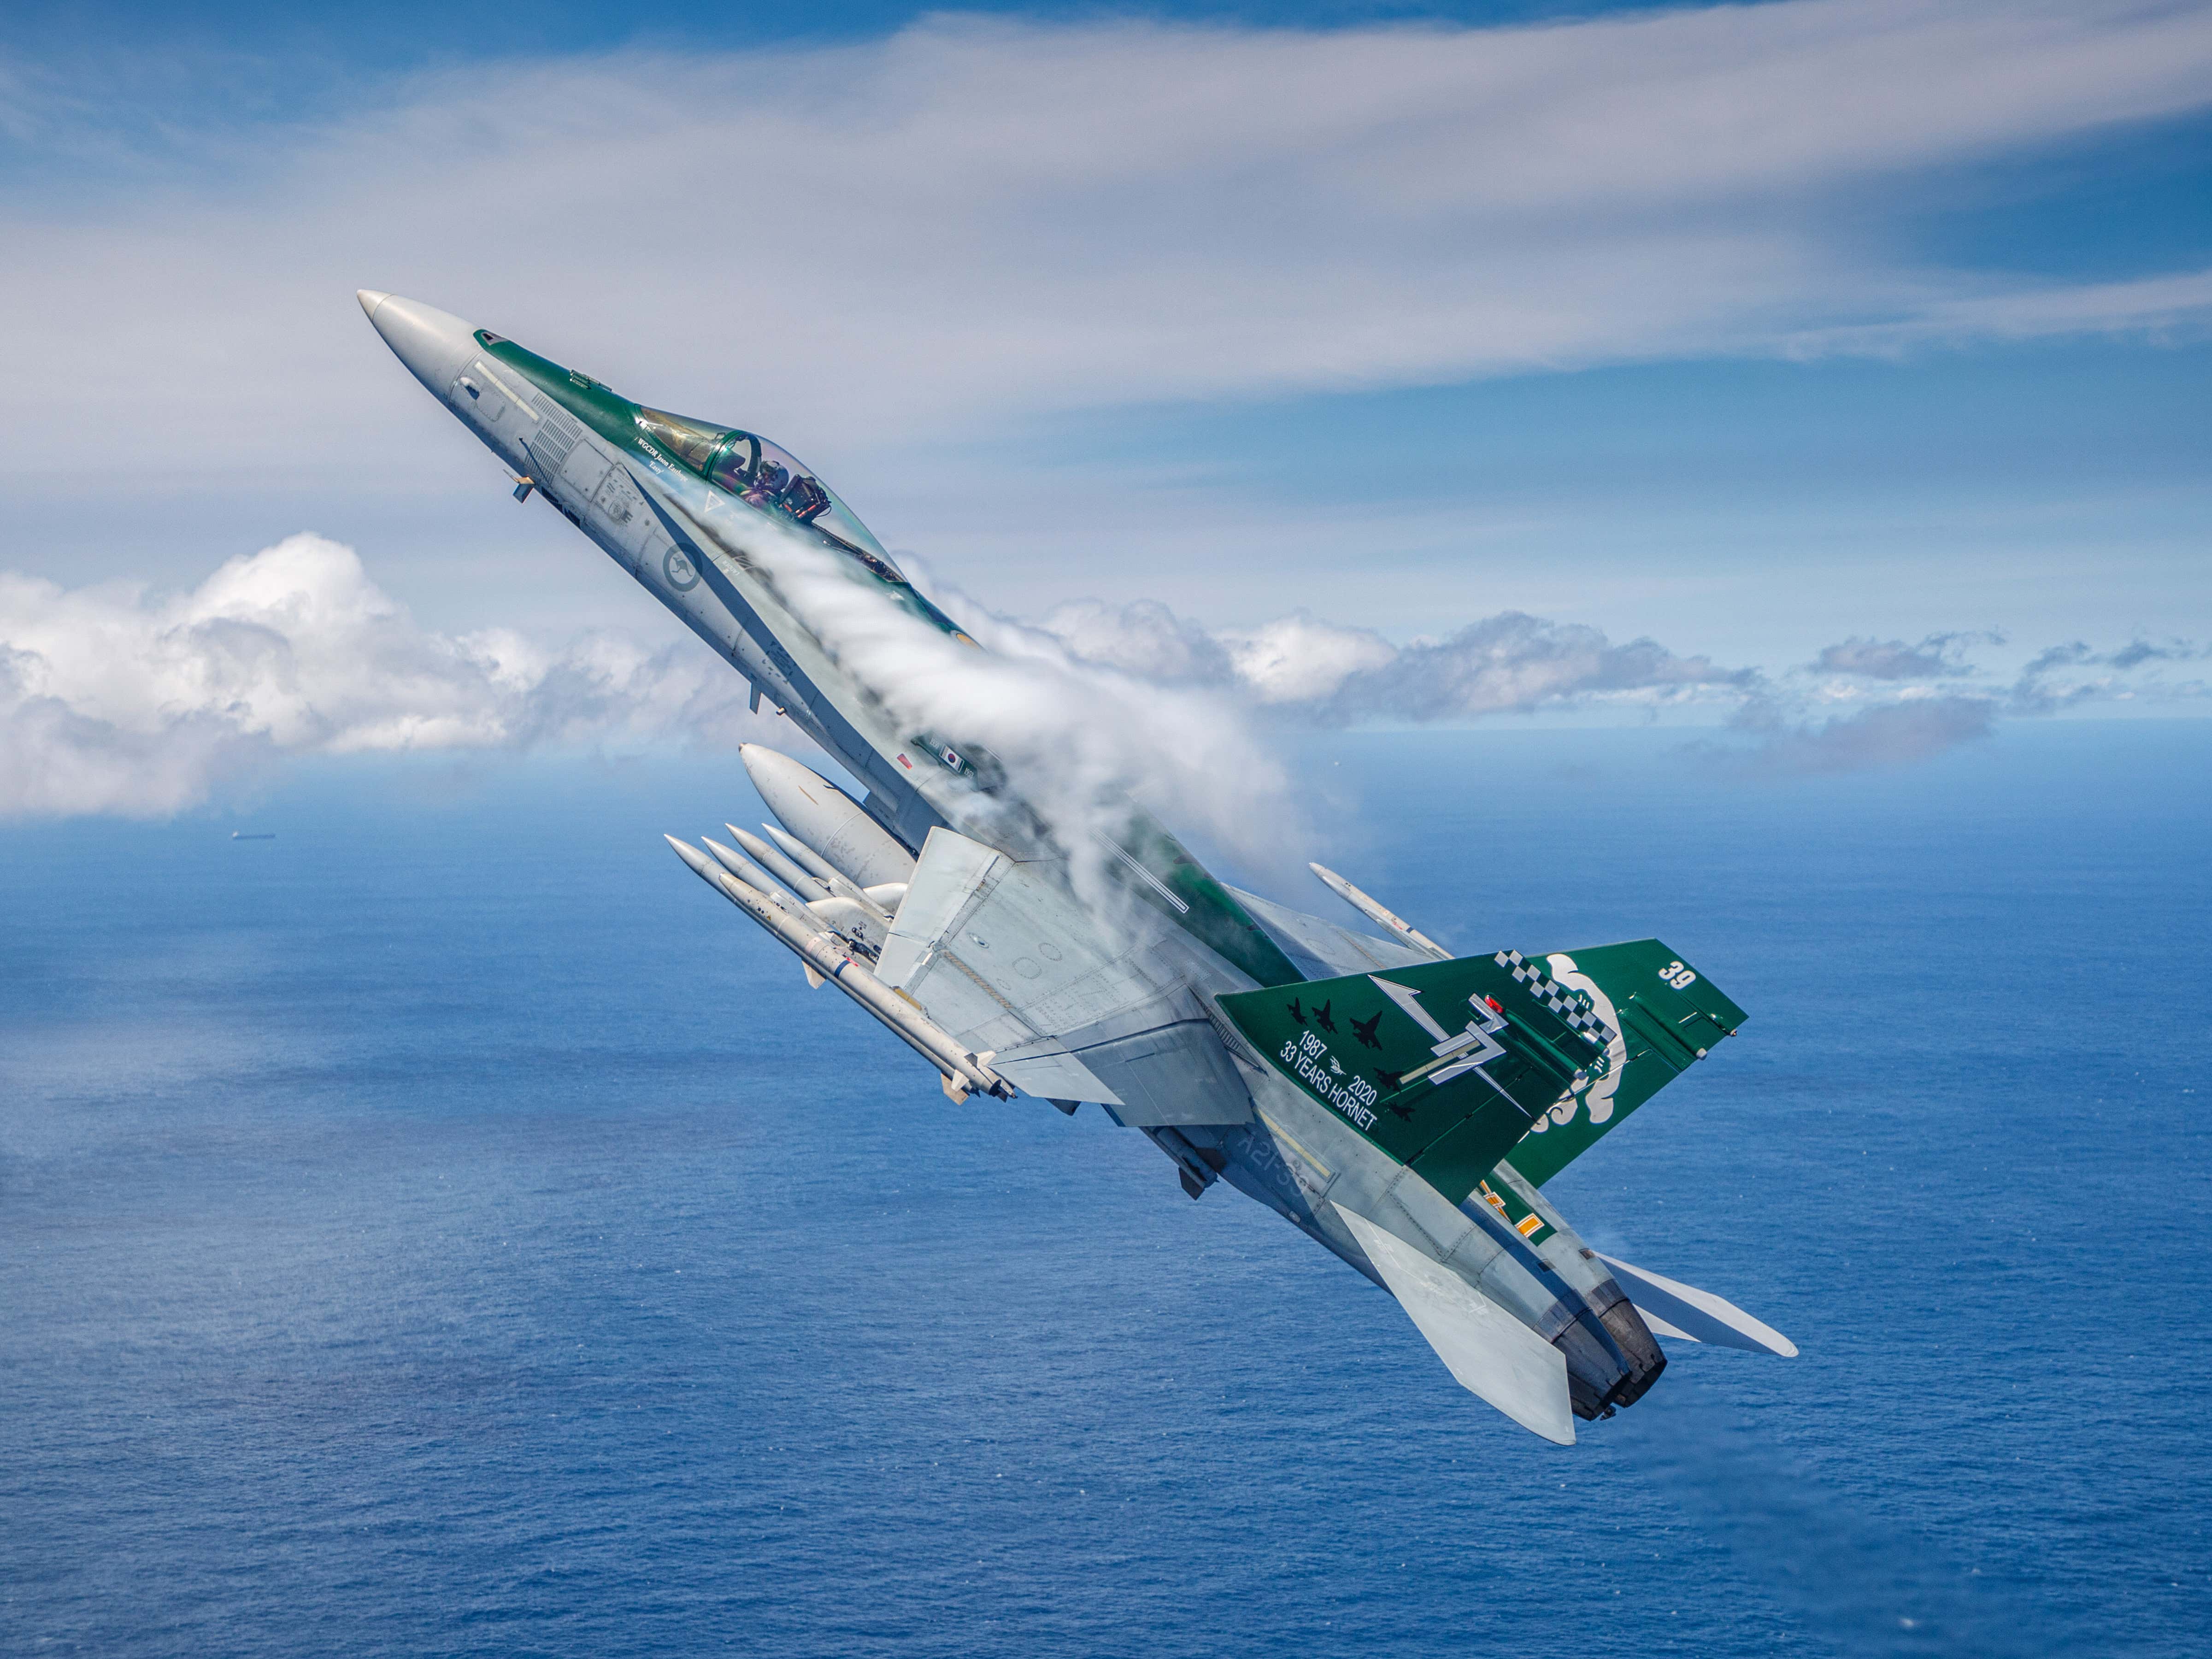 Aussie F A 18 Hornet Bristling With Missiles Joins Others For Spectacular Photo Shoot